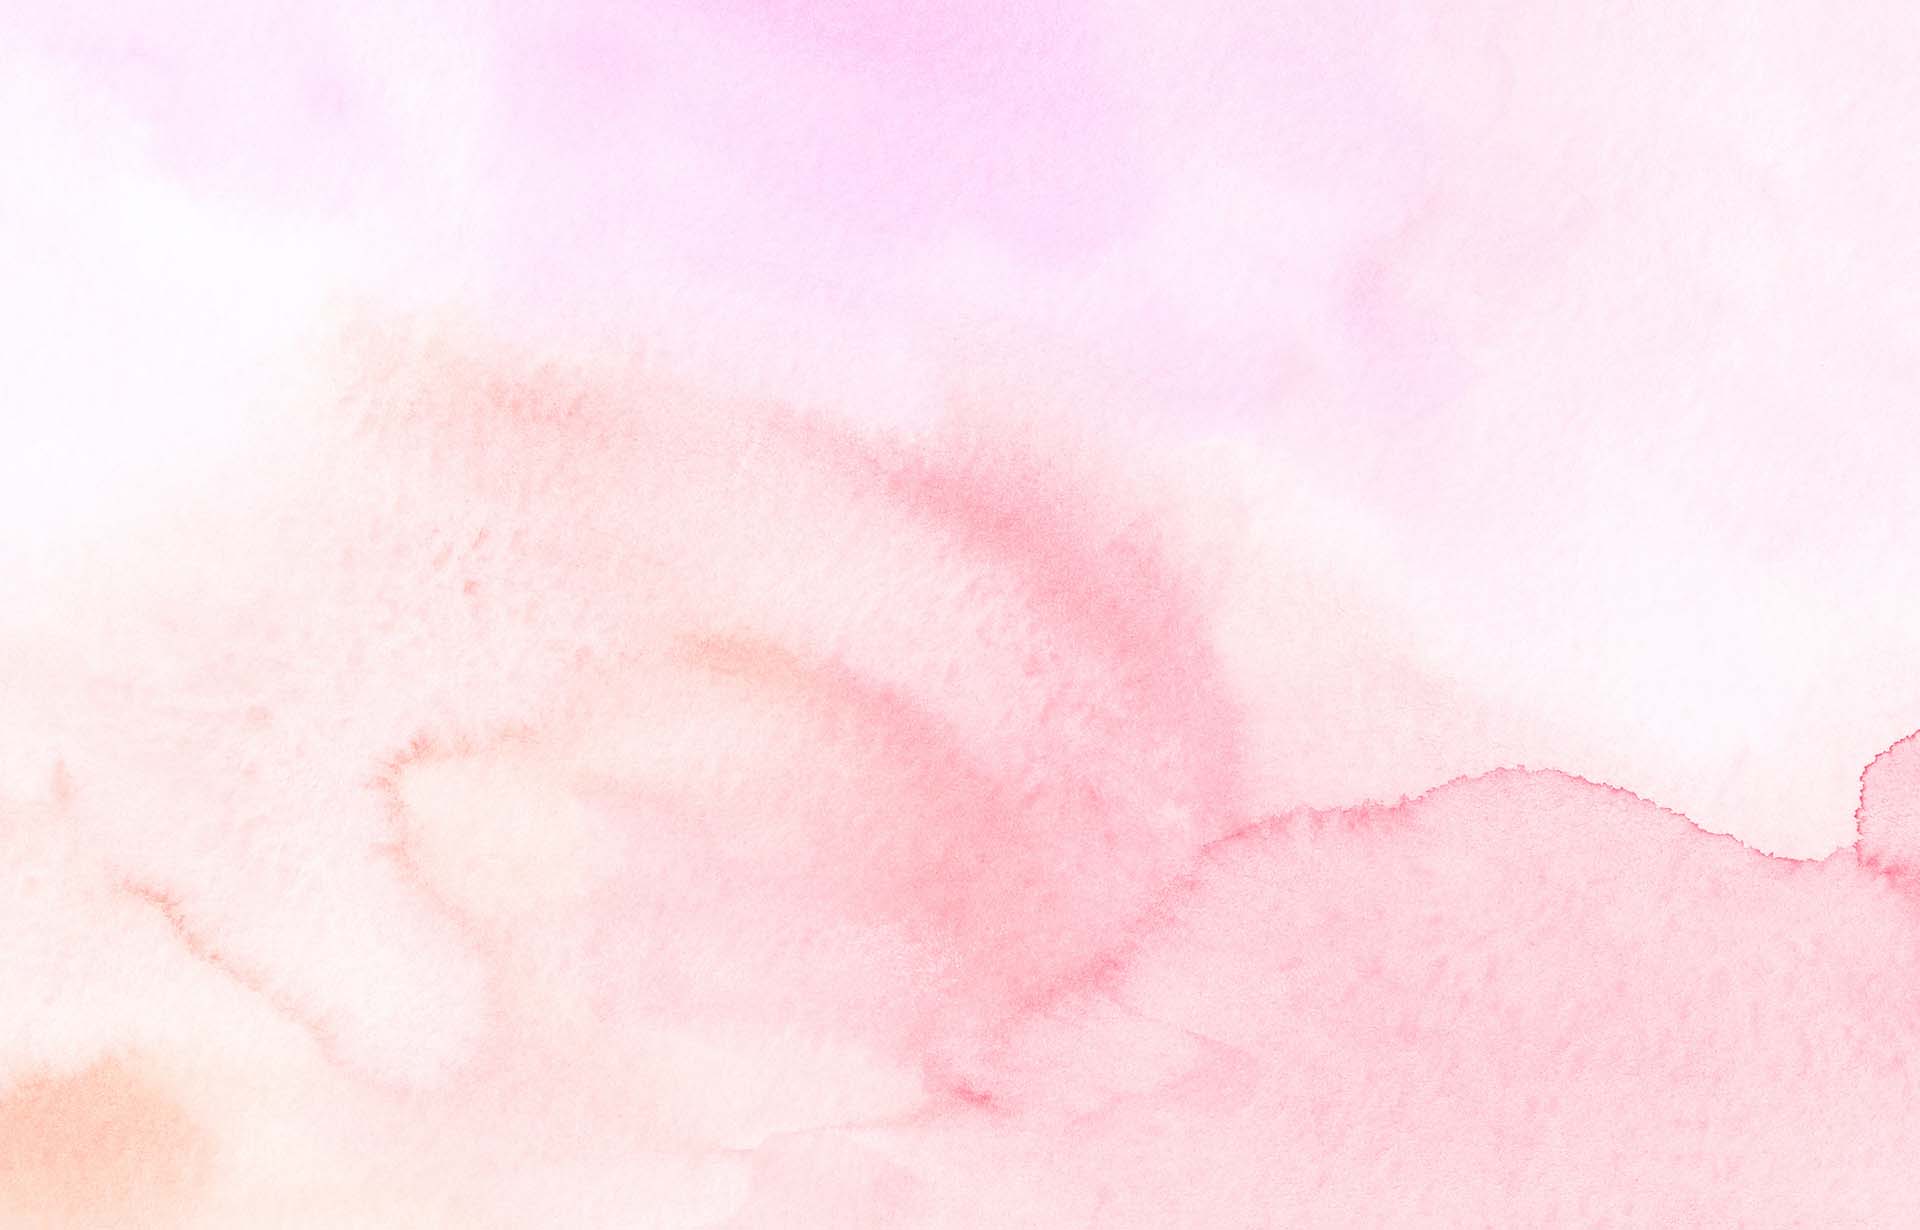 Pink Watercolor - Header Image for the Limiting Beliefs Blog Post